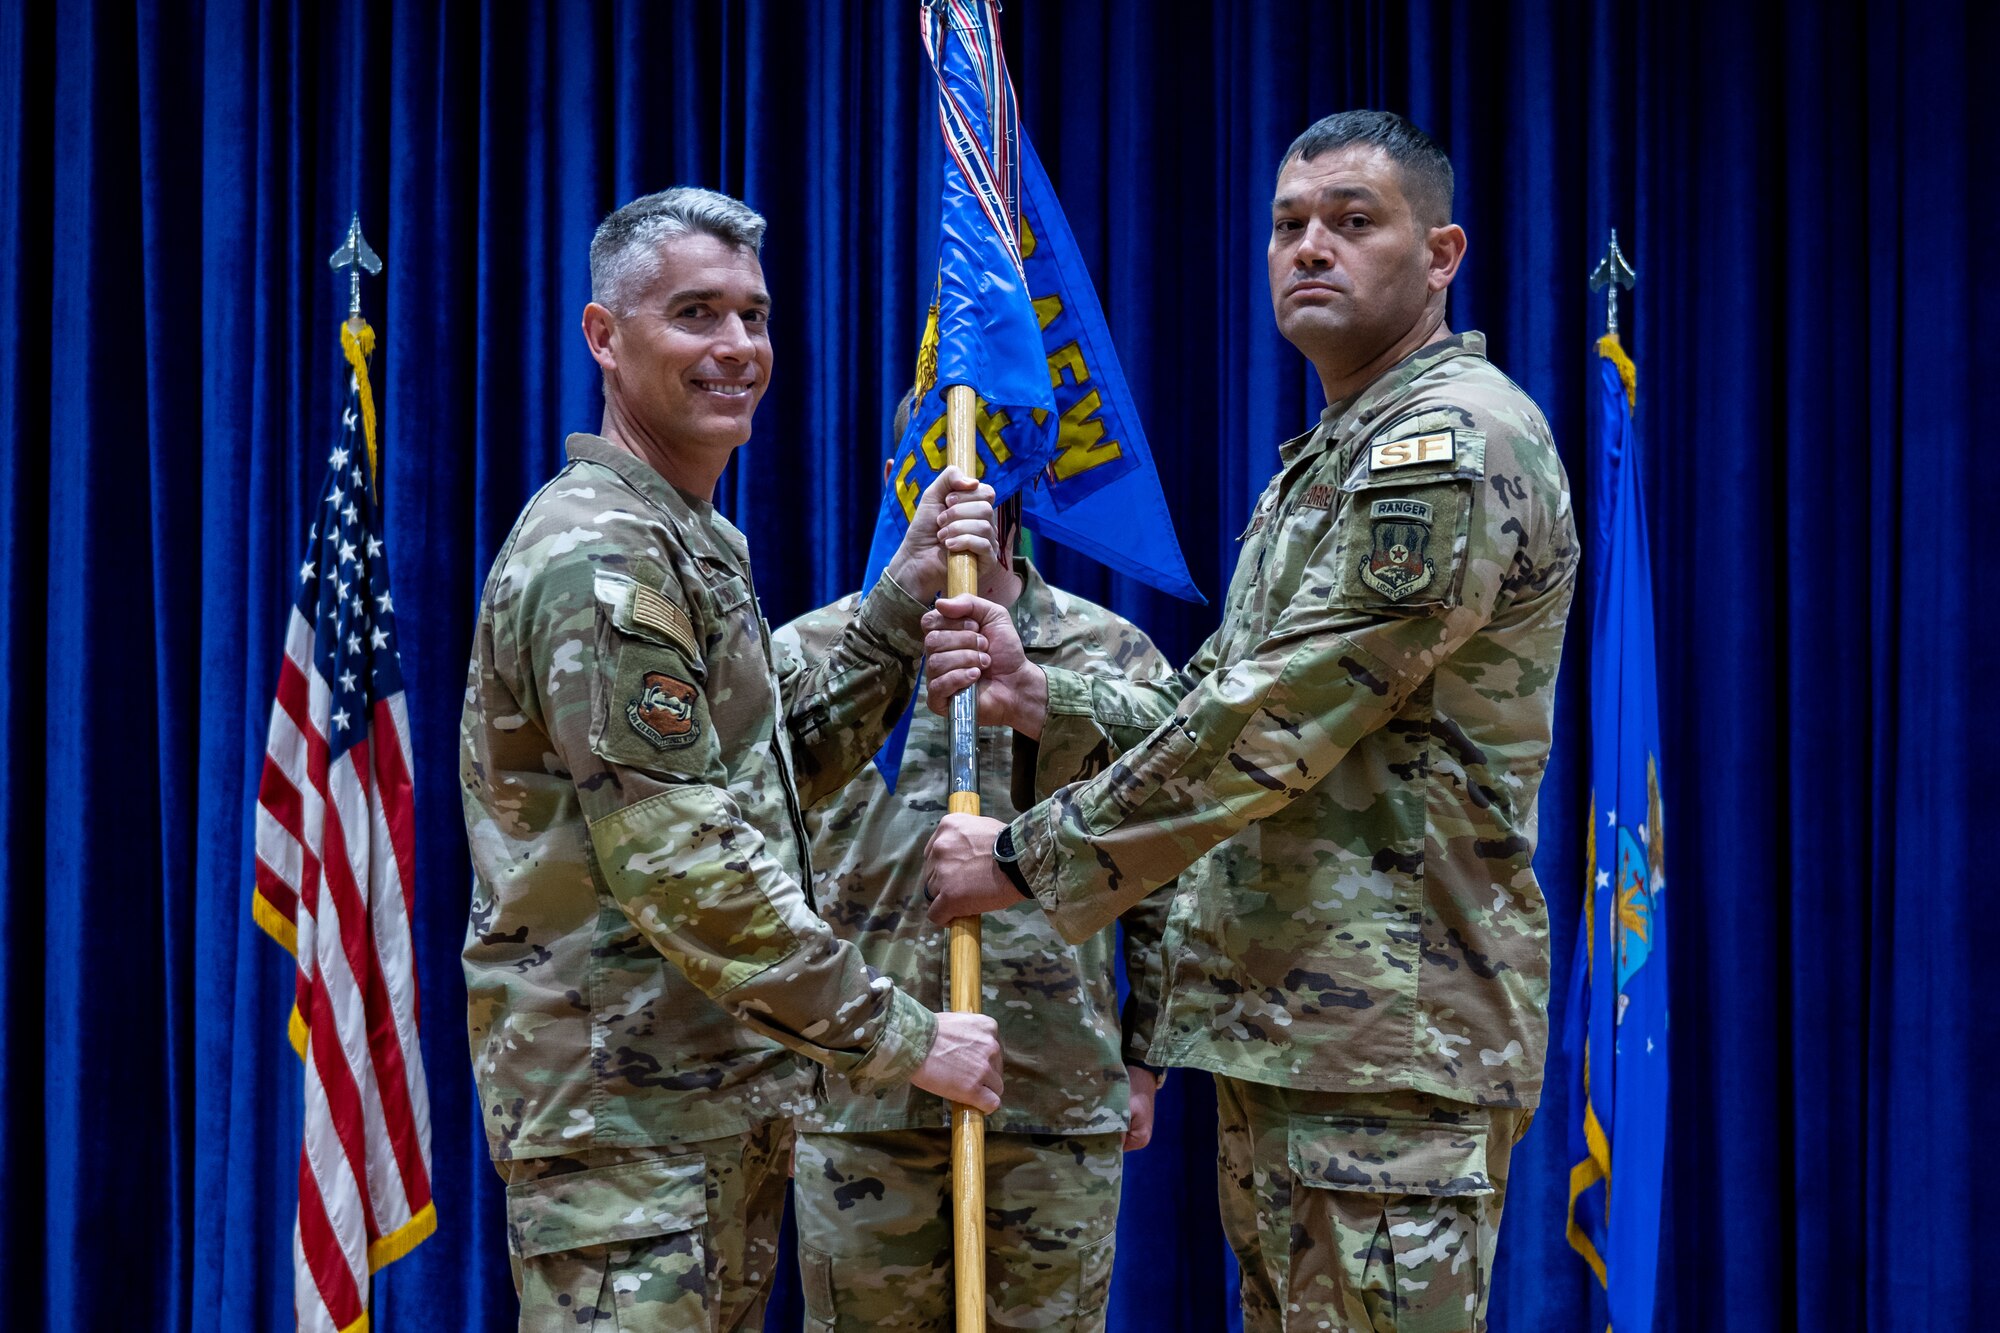 U.S. Air Force Col. George Buch, Jr., 386th Air Expeditionary Wing commander, passes the guidon to Lt. Col. Michael E. Wetlesen, incoming 386th Expeditionary Security Forces Squadron commander, during a change of command ceremony at Ali Al Salem Air Base, Kuwait, June 23, 2023. The passing of the guidon symbolizes the passing of command from one commander to the next. (U.S. Air Force photo by Staff Sgt. Kevin Long)